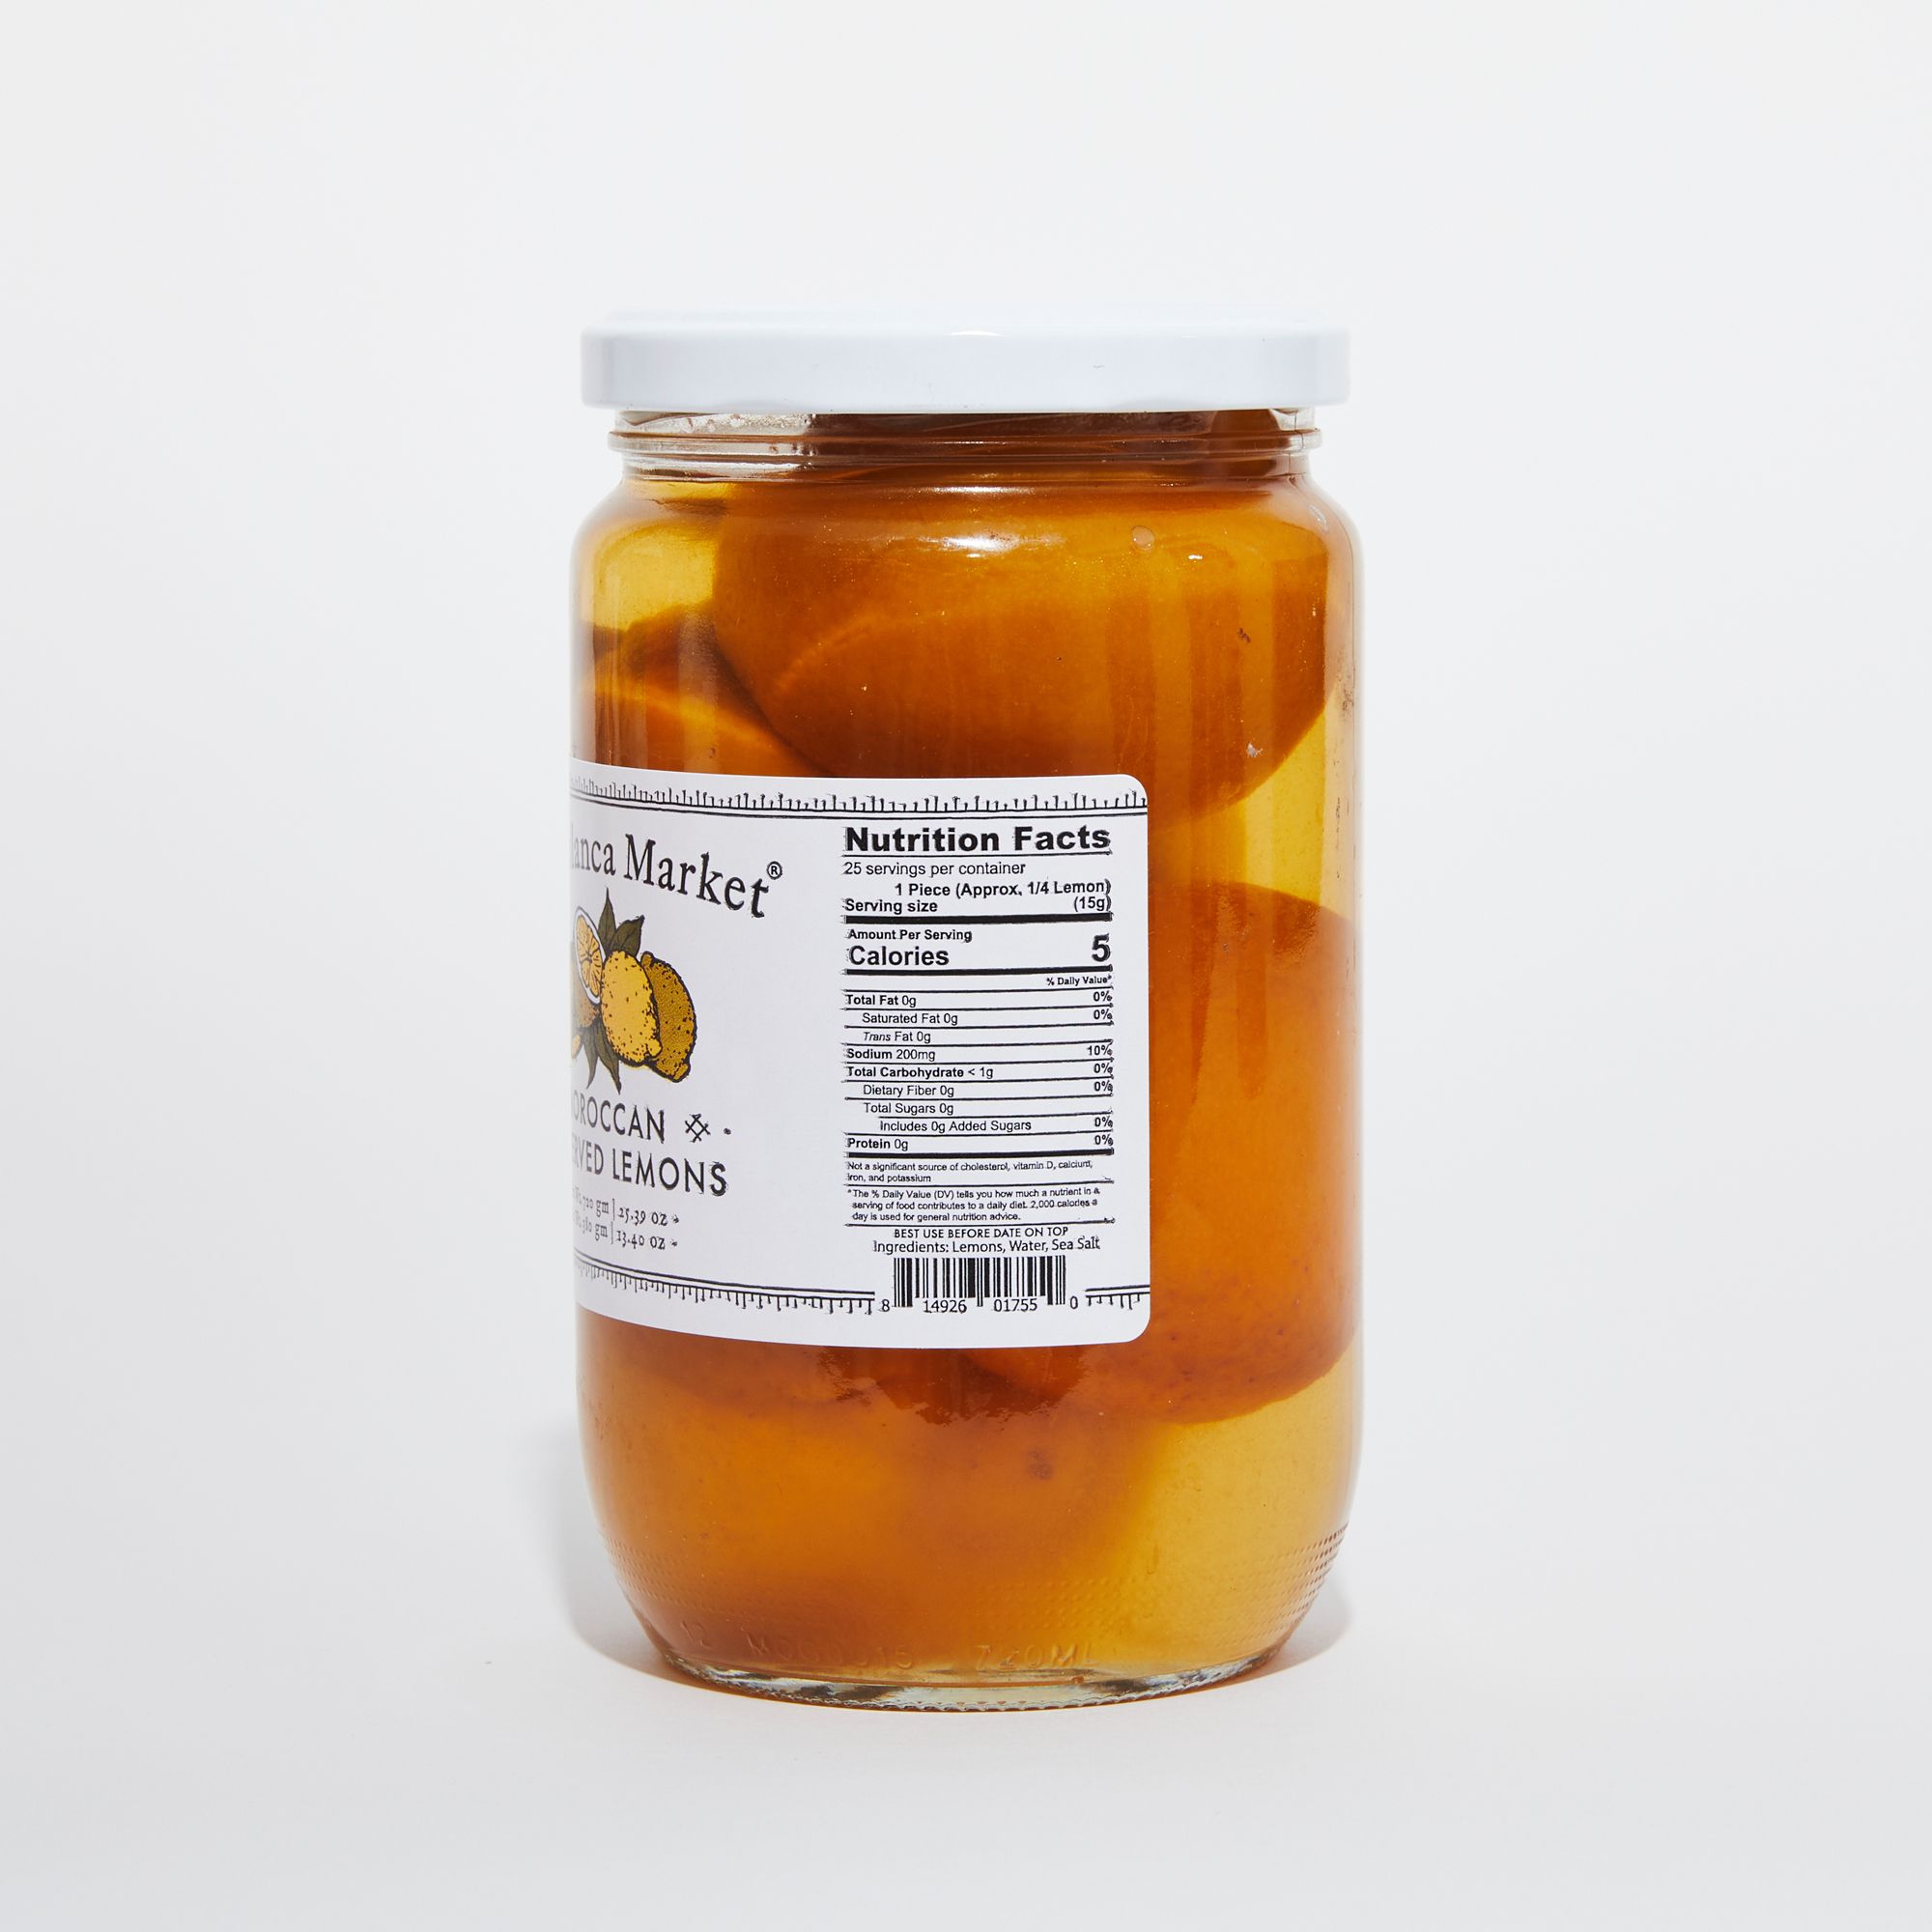 Clear jar with a white label featuring nutritional facts